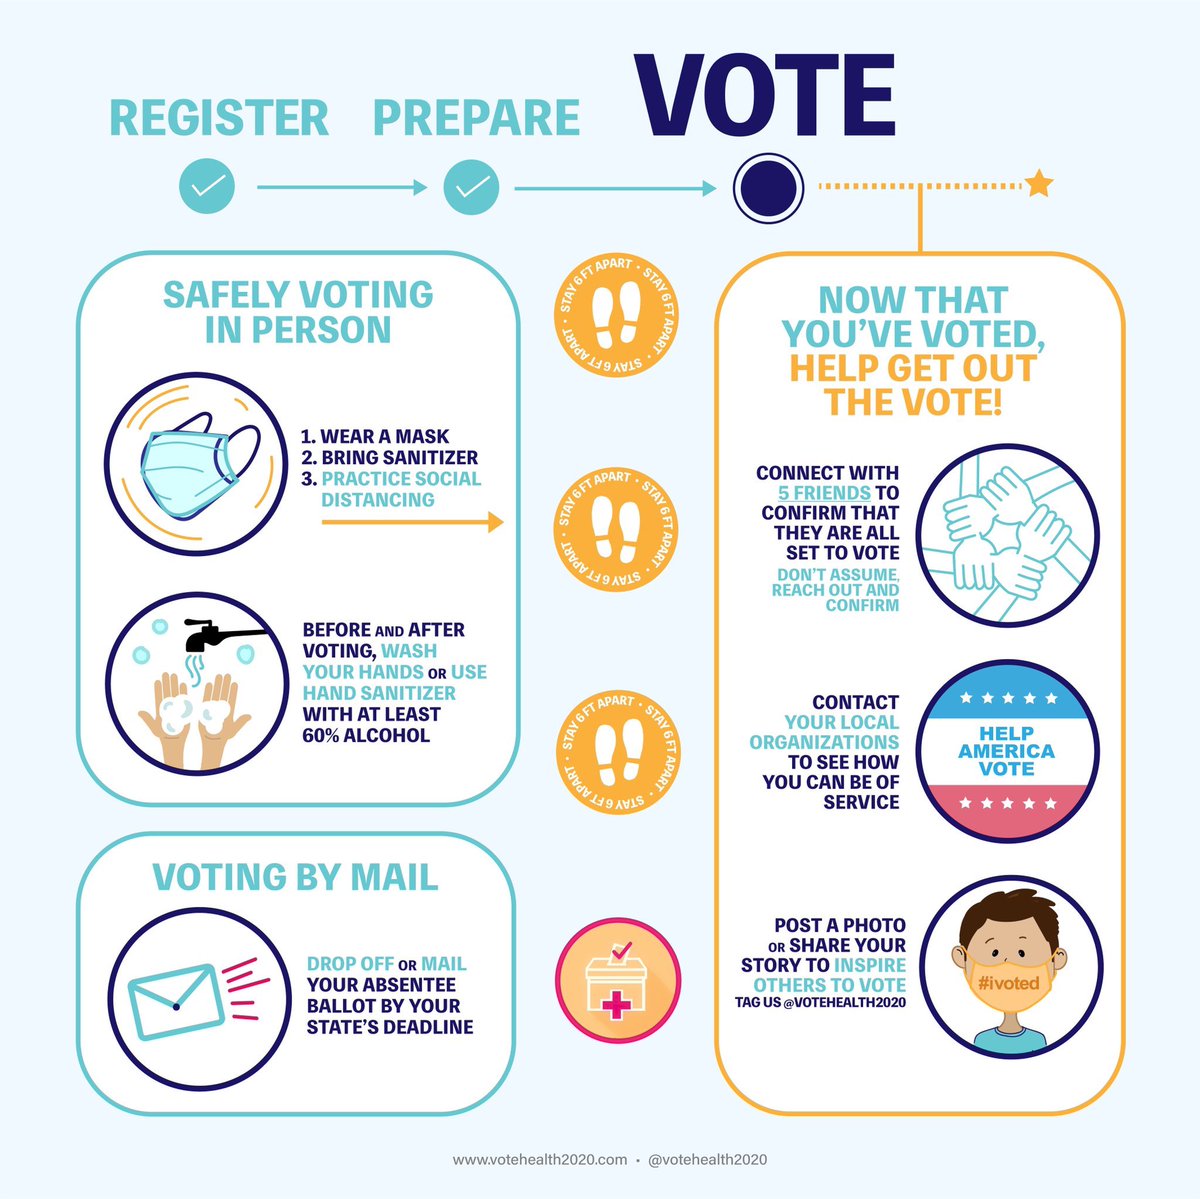 As a final ask: make sure your friends and family have great voting plans and are dropping off their ballots. Don't trust the mail.  @votehealth2020 has great guides  7/